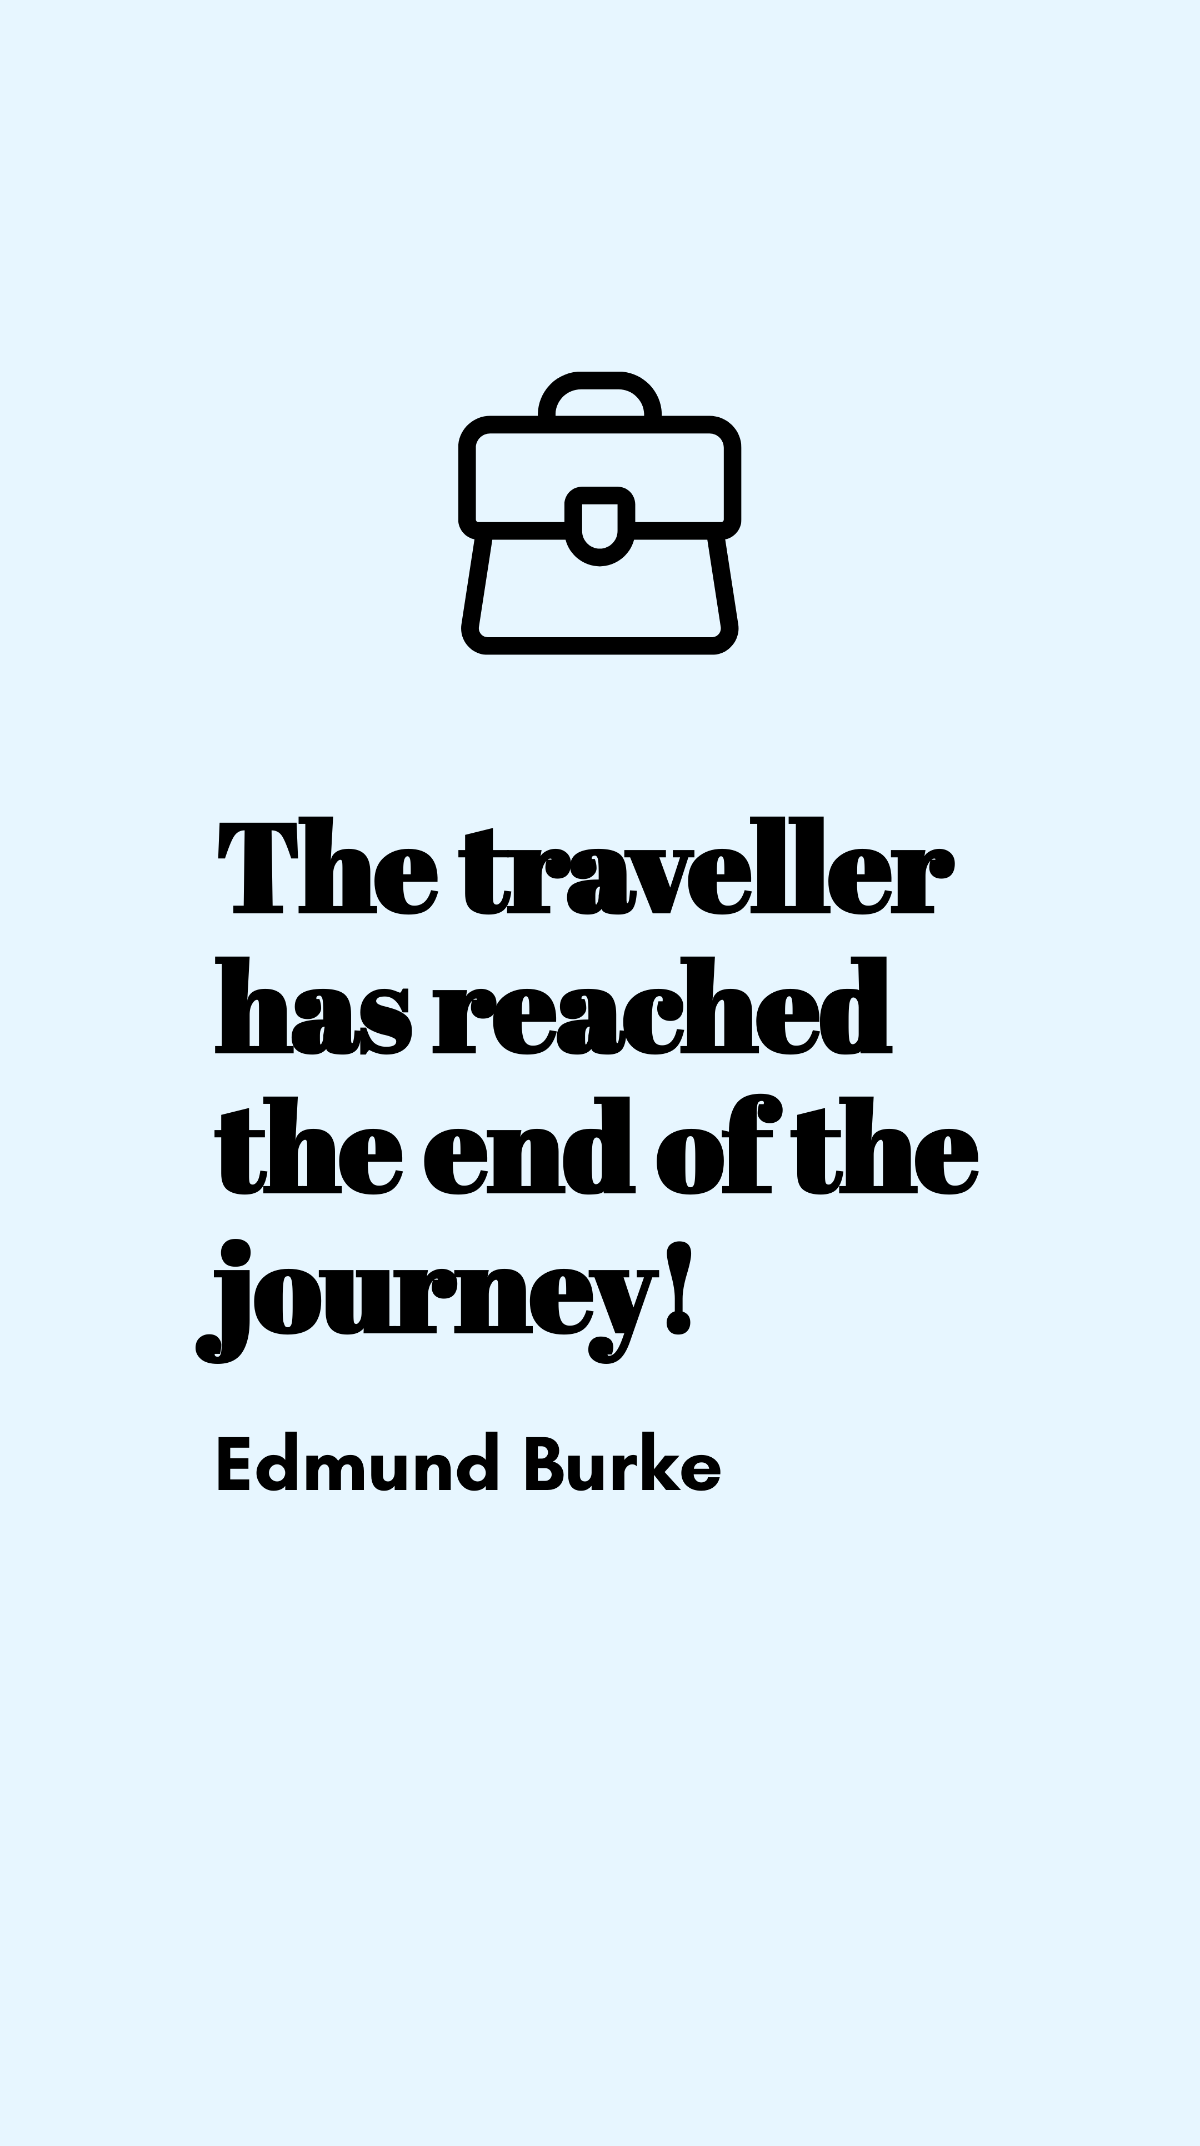 Free Edmund Burke - The traveller has reached the end of the journey! Template